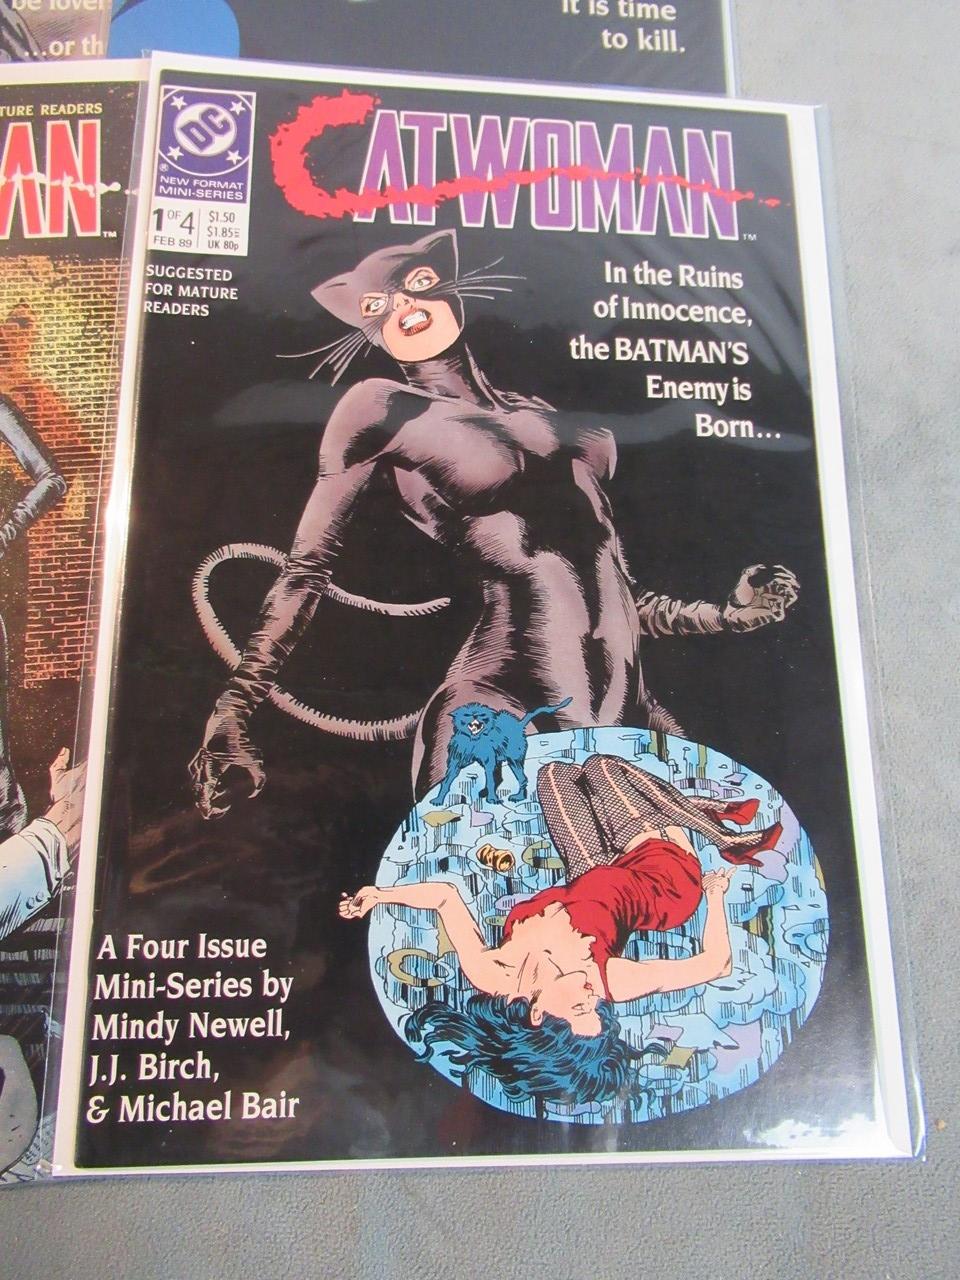 Catwoman #1-4 (1989)